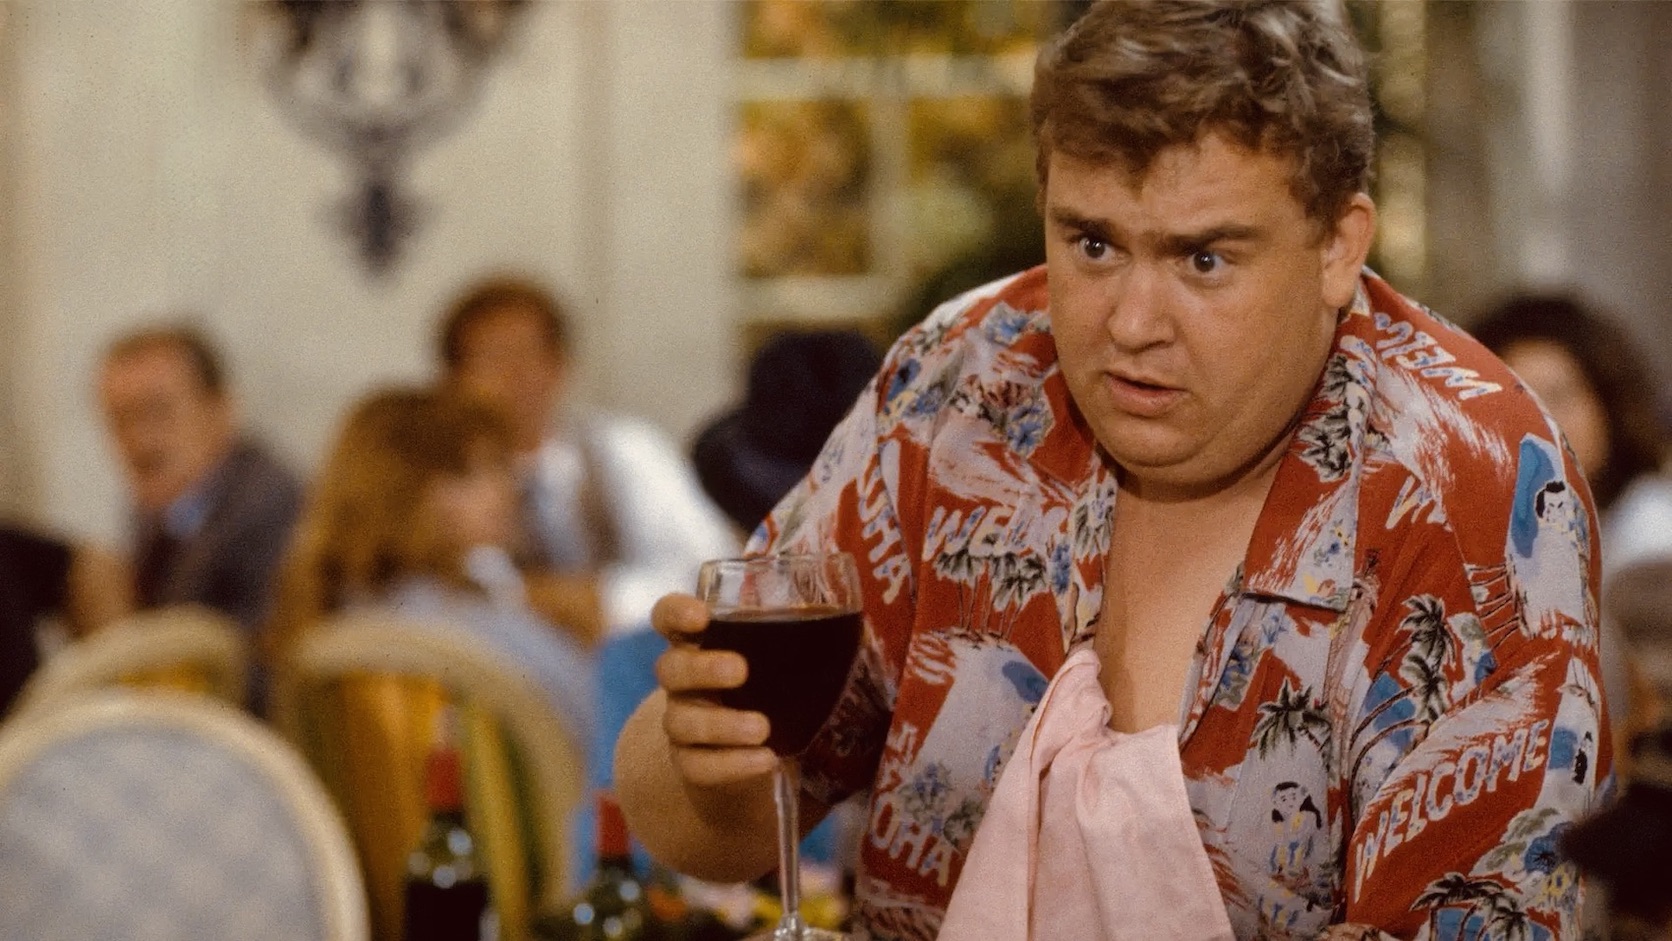 John Candy in Brewster's Millions.